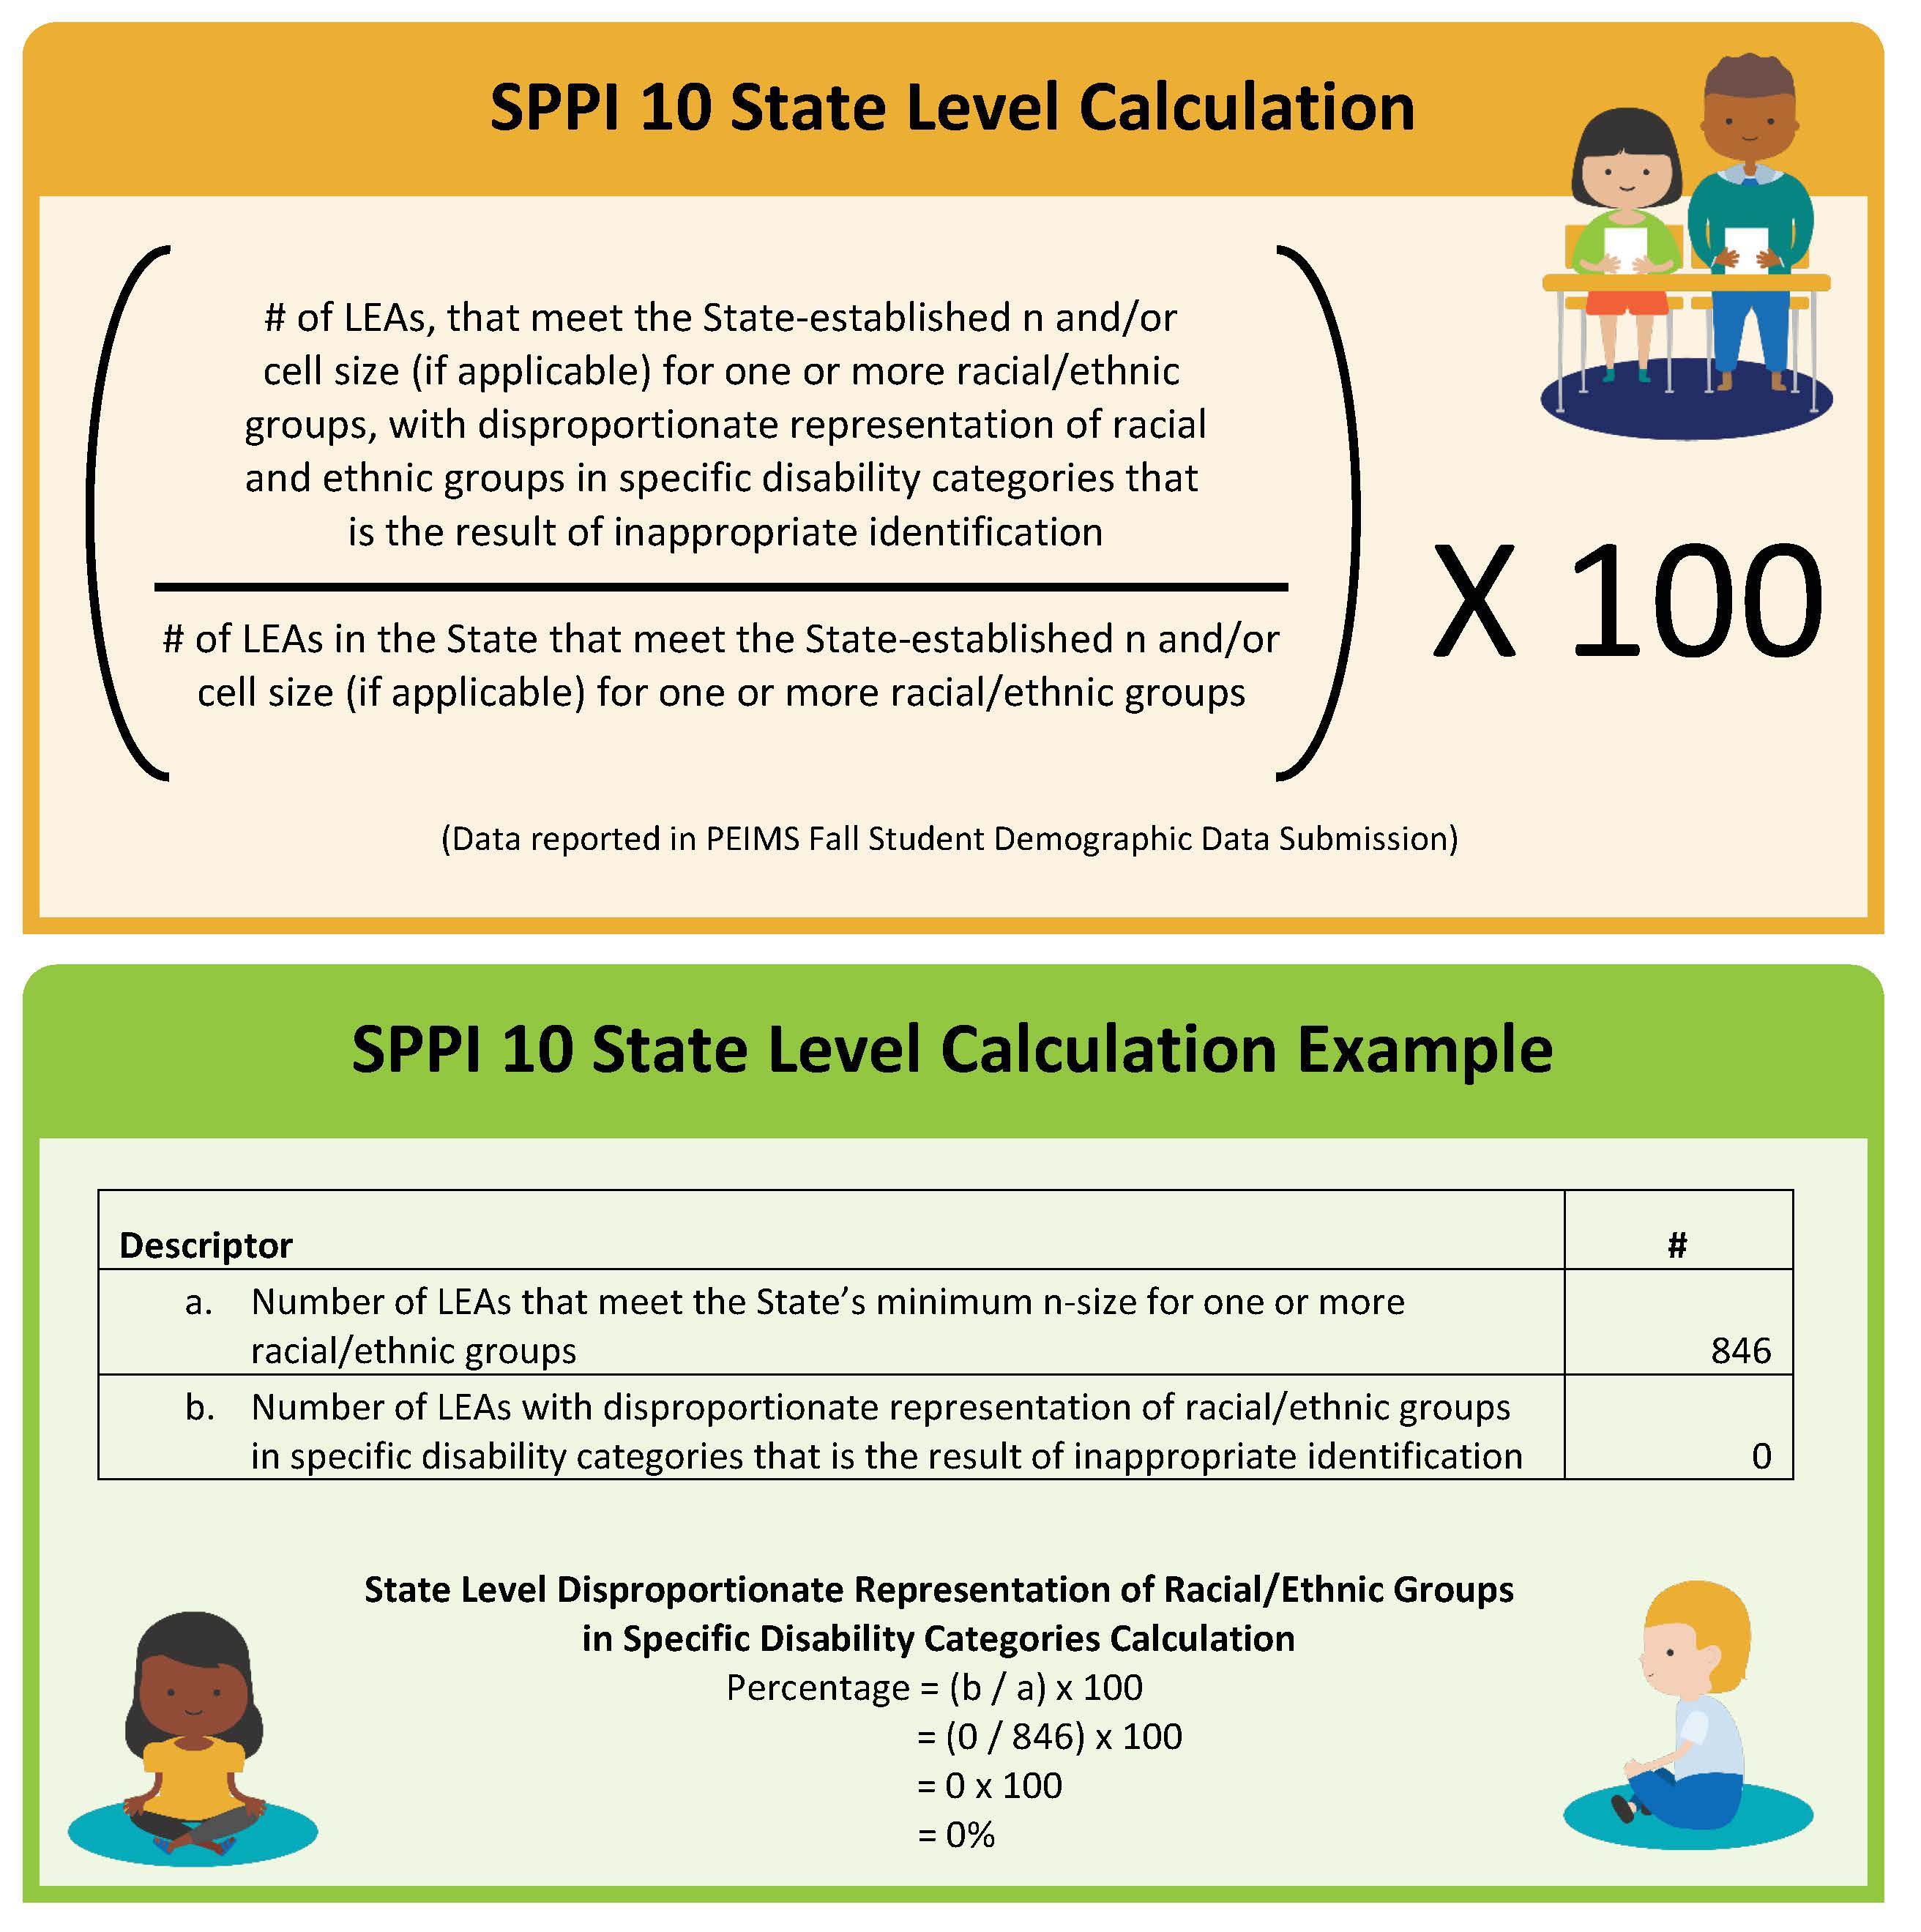 SPPI 10 Calculation and Example